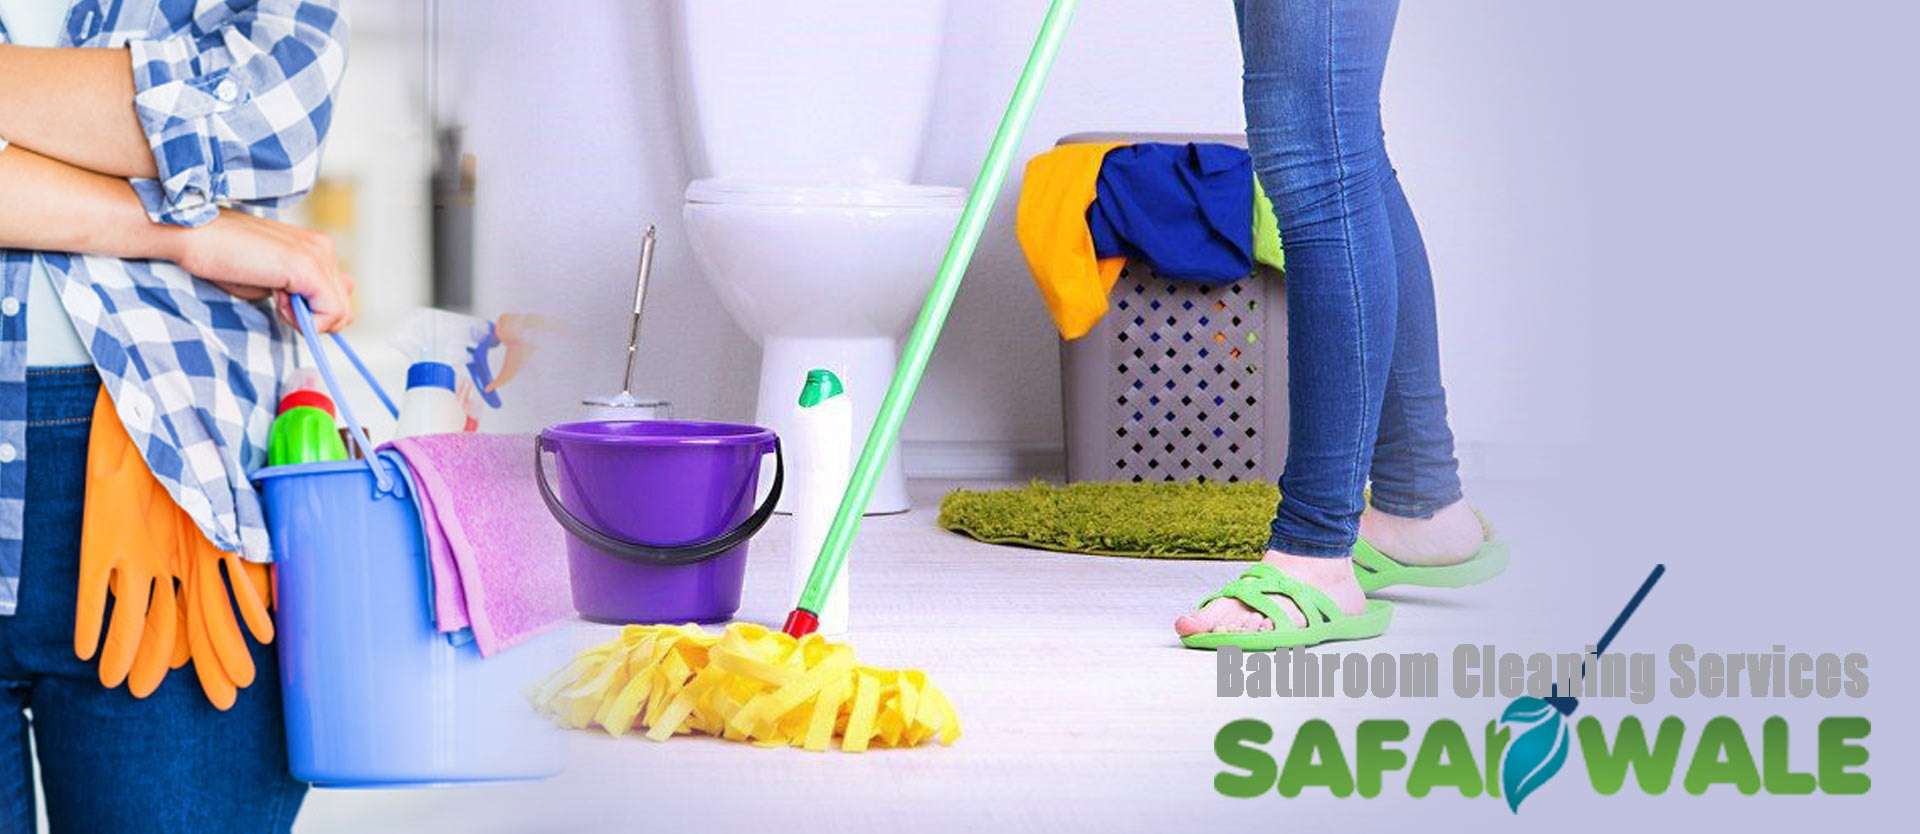 Bathroom Cleaning Services In Sahibabad